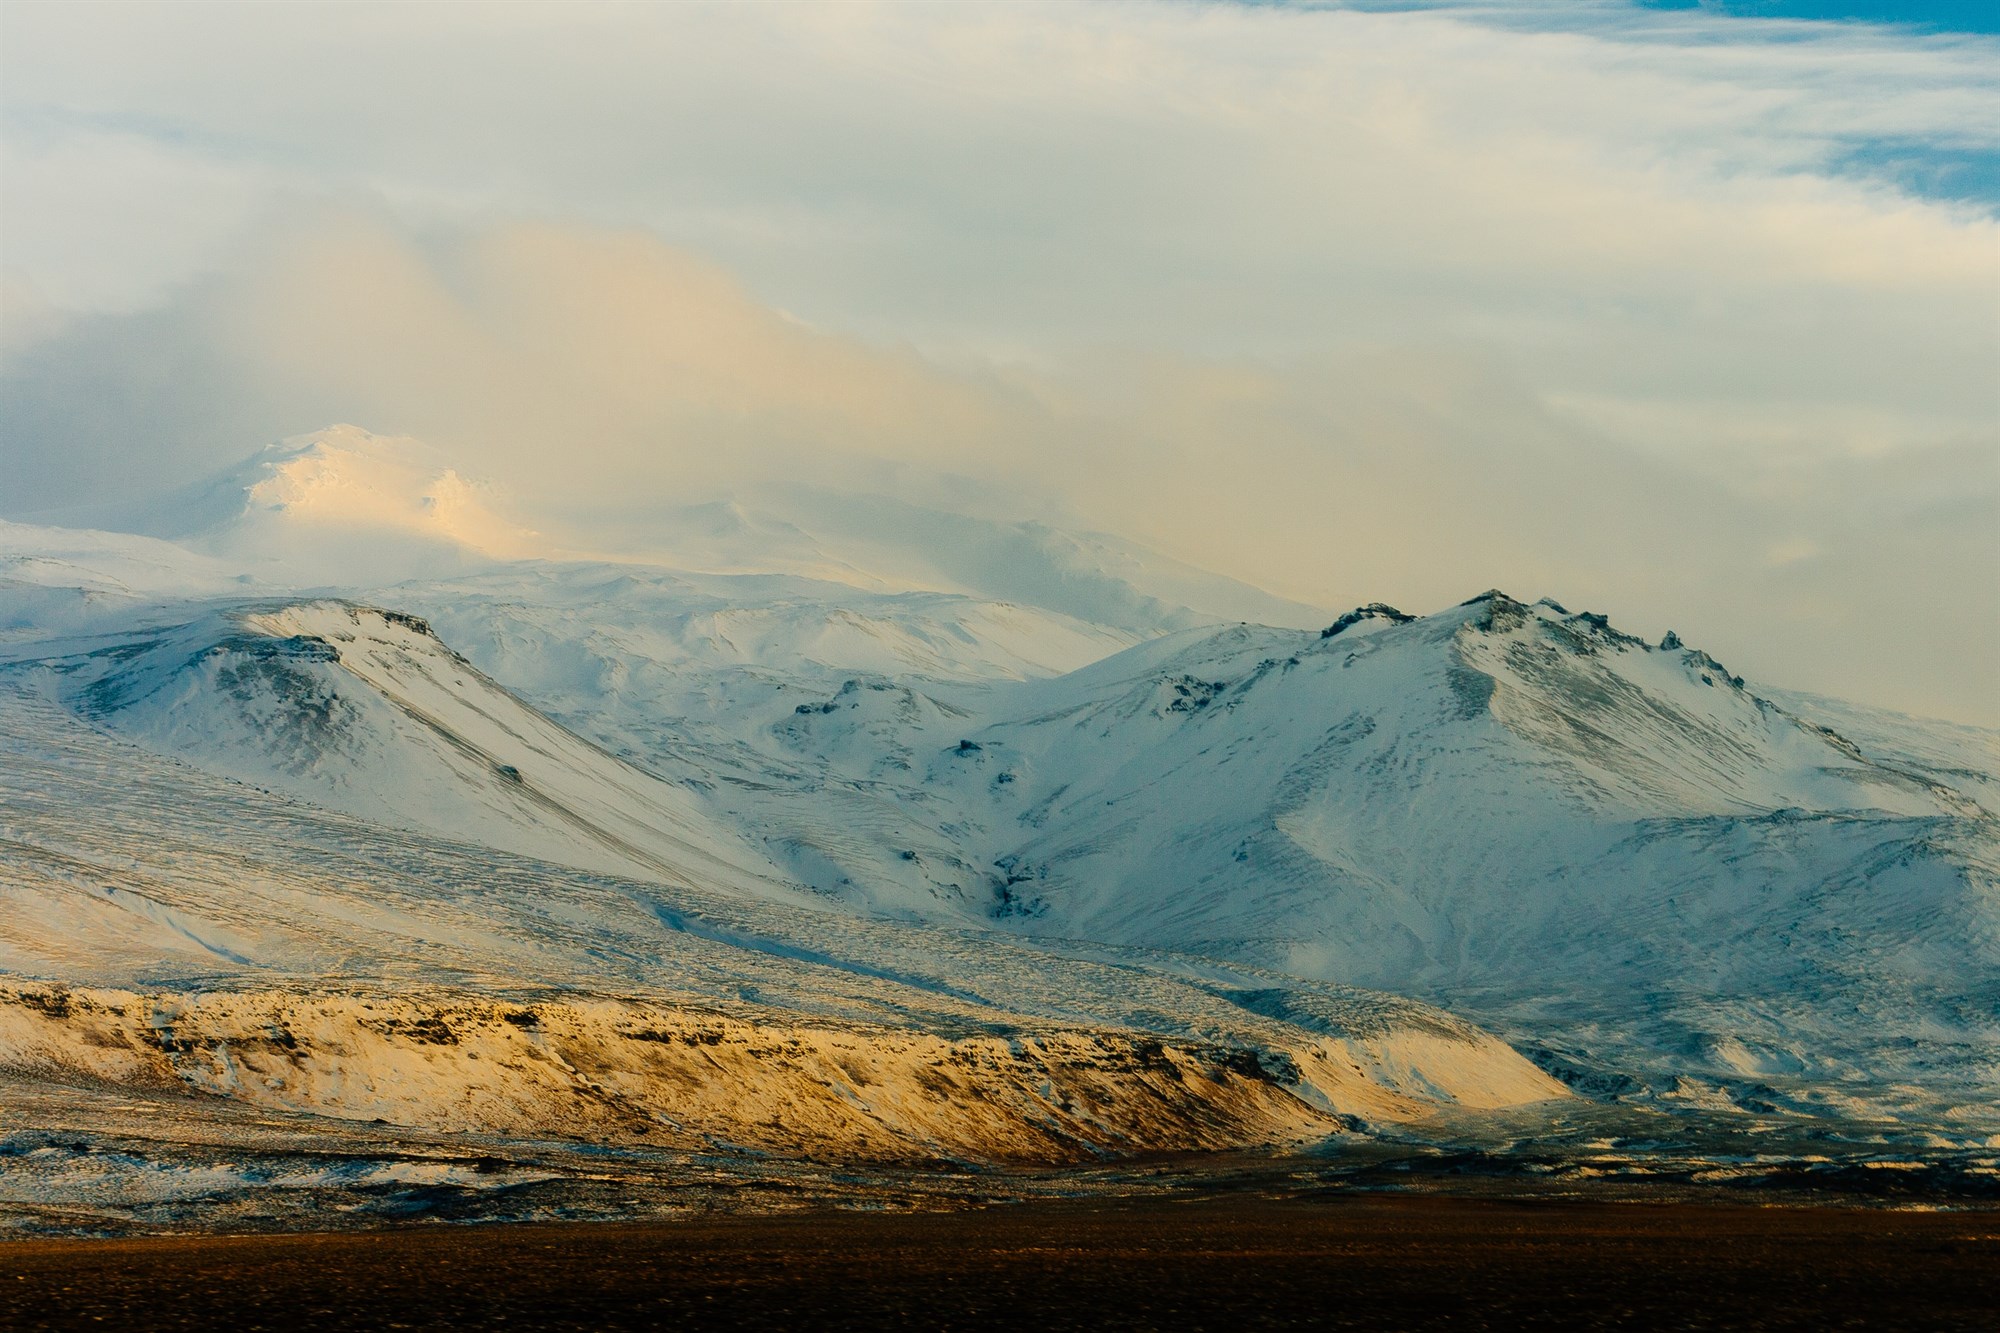 Panoramic view of the snow-covered Snæfellsjökull volcano and surrounding mountains in Iceland